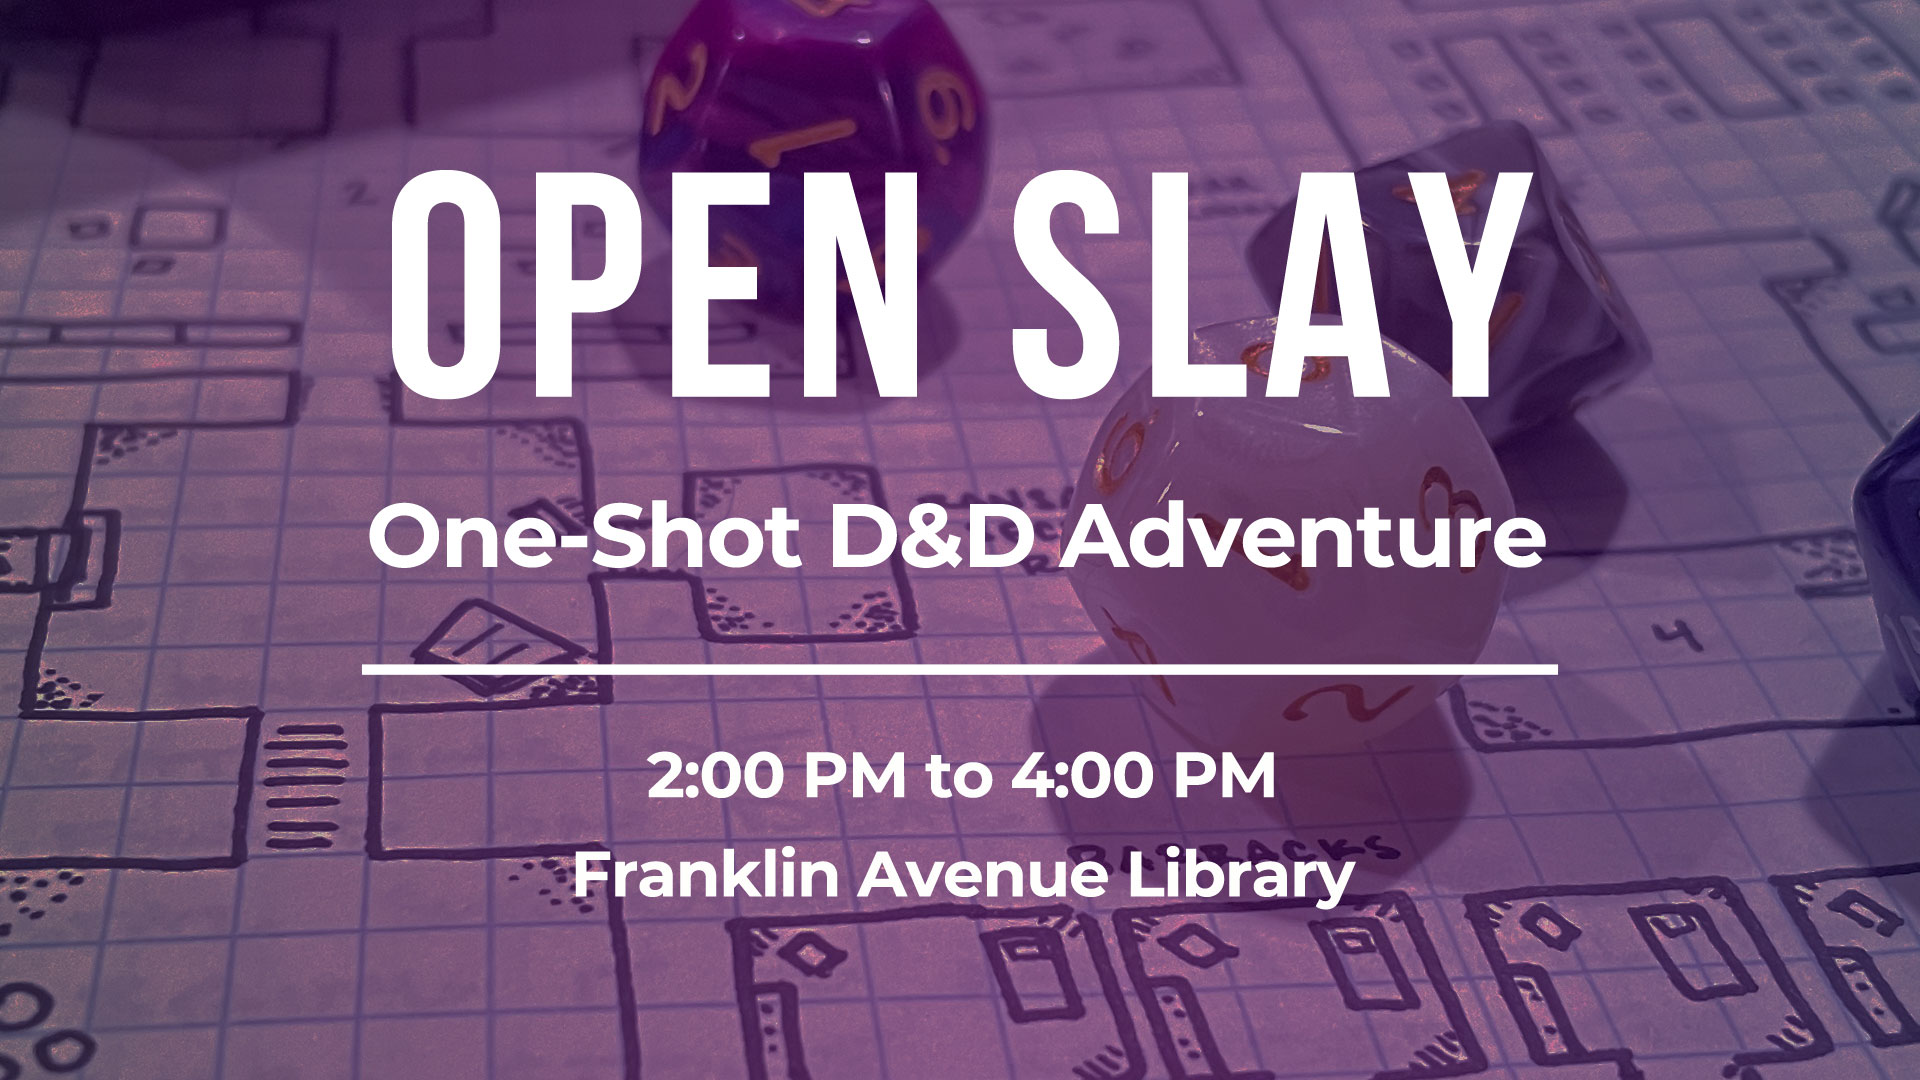 Open Slay One-Shot Dungeons and Dragons Campaign at Des Moines Franklin Avenue Library Event Image